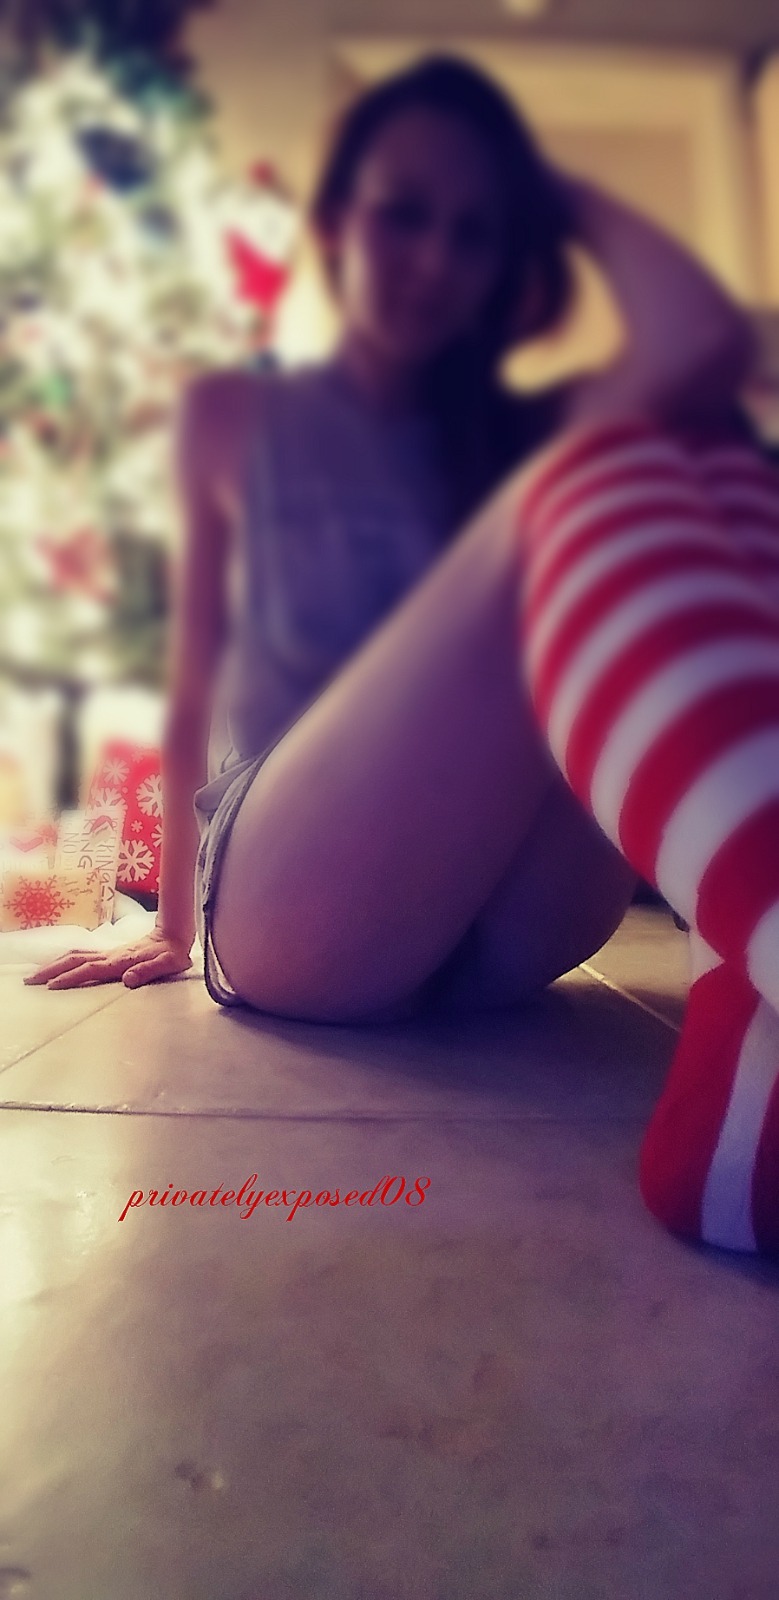 privatelyexposed08:  I’ll be in a red bow next time daddy. 😍Merry ChristmasEvery